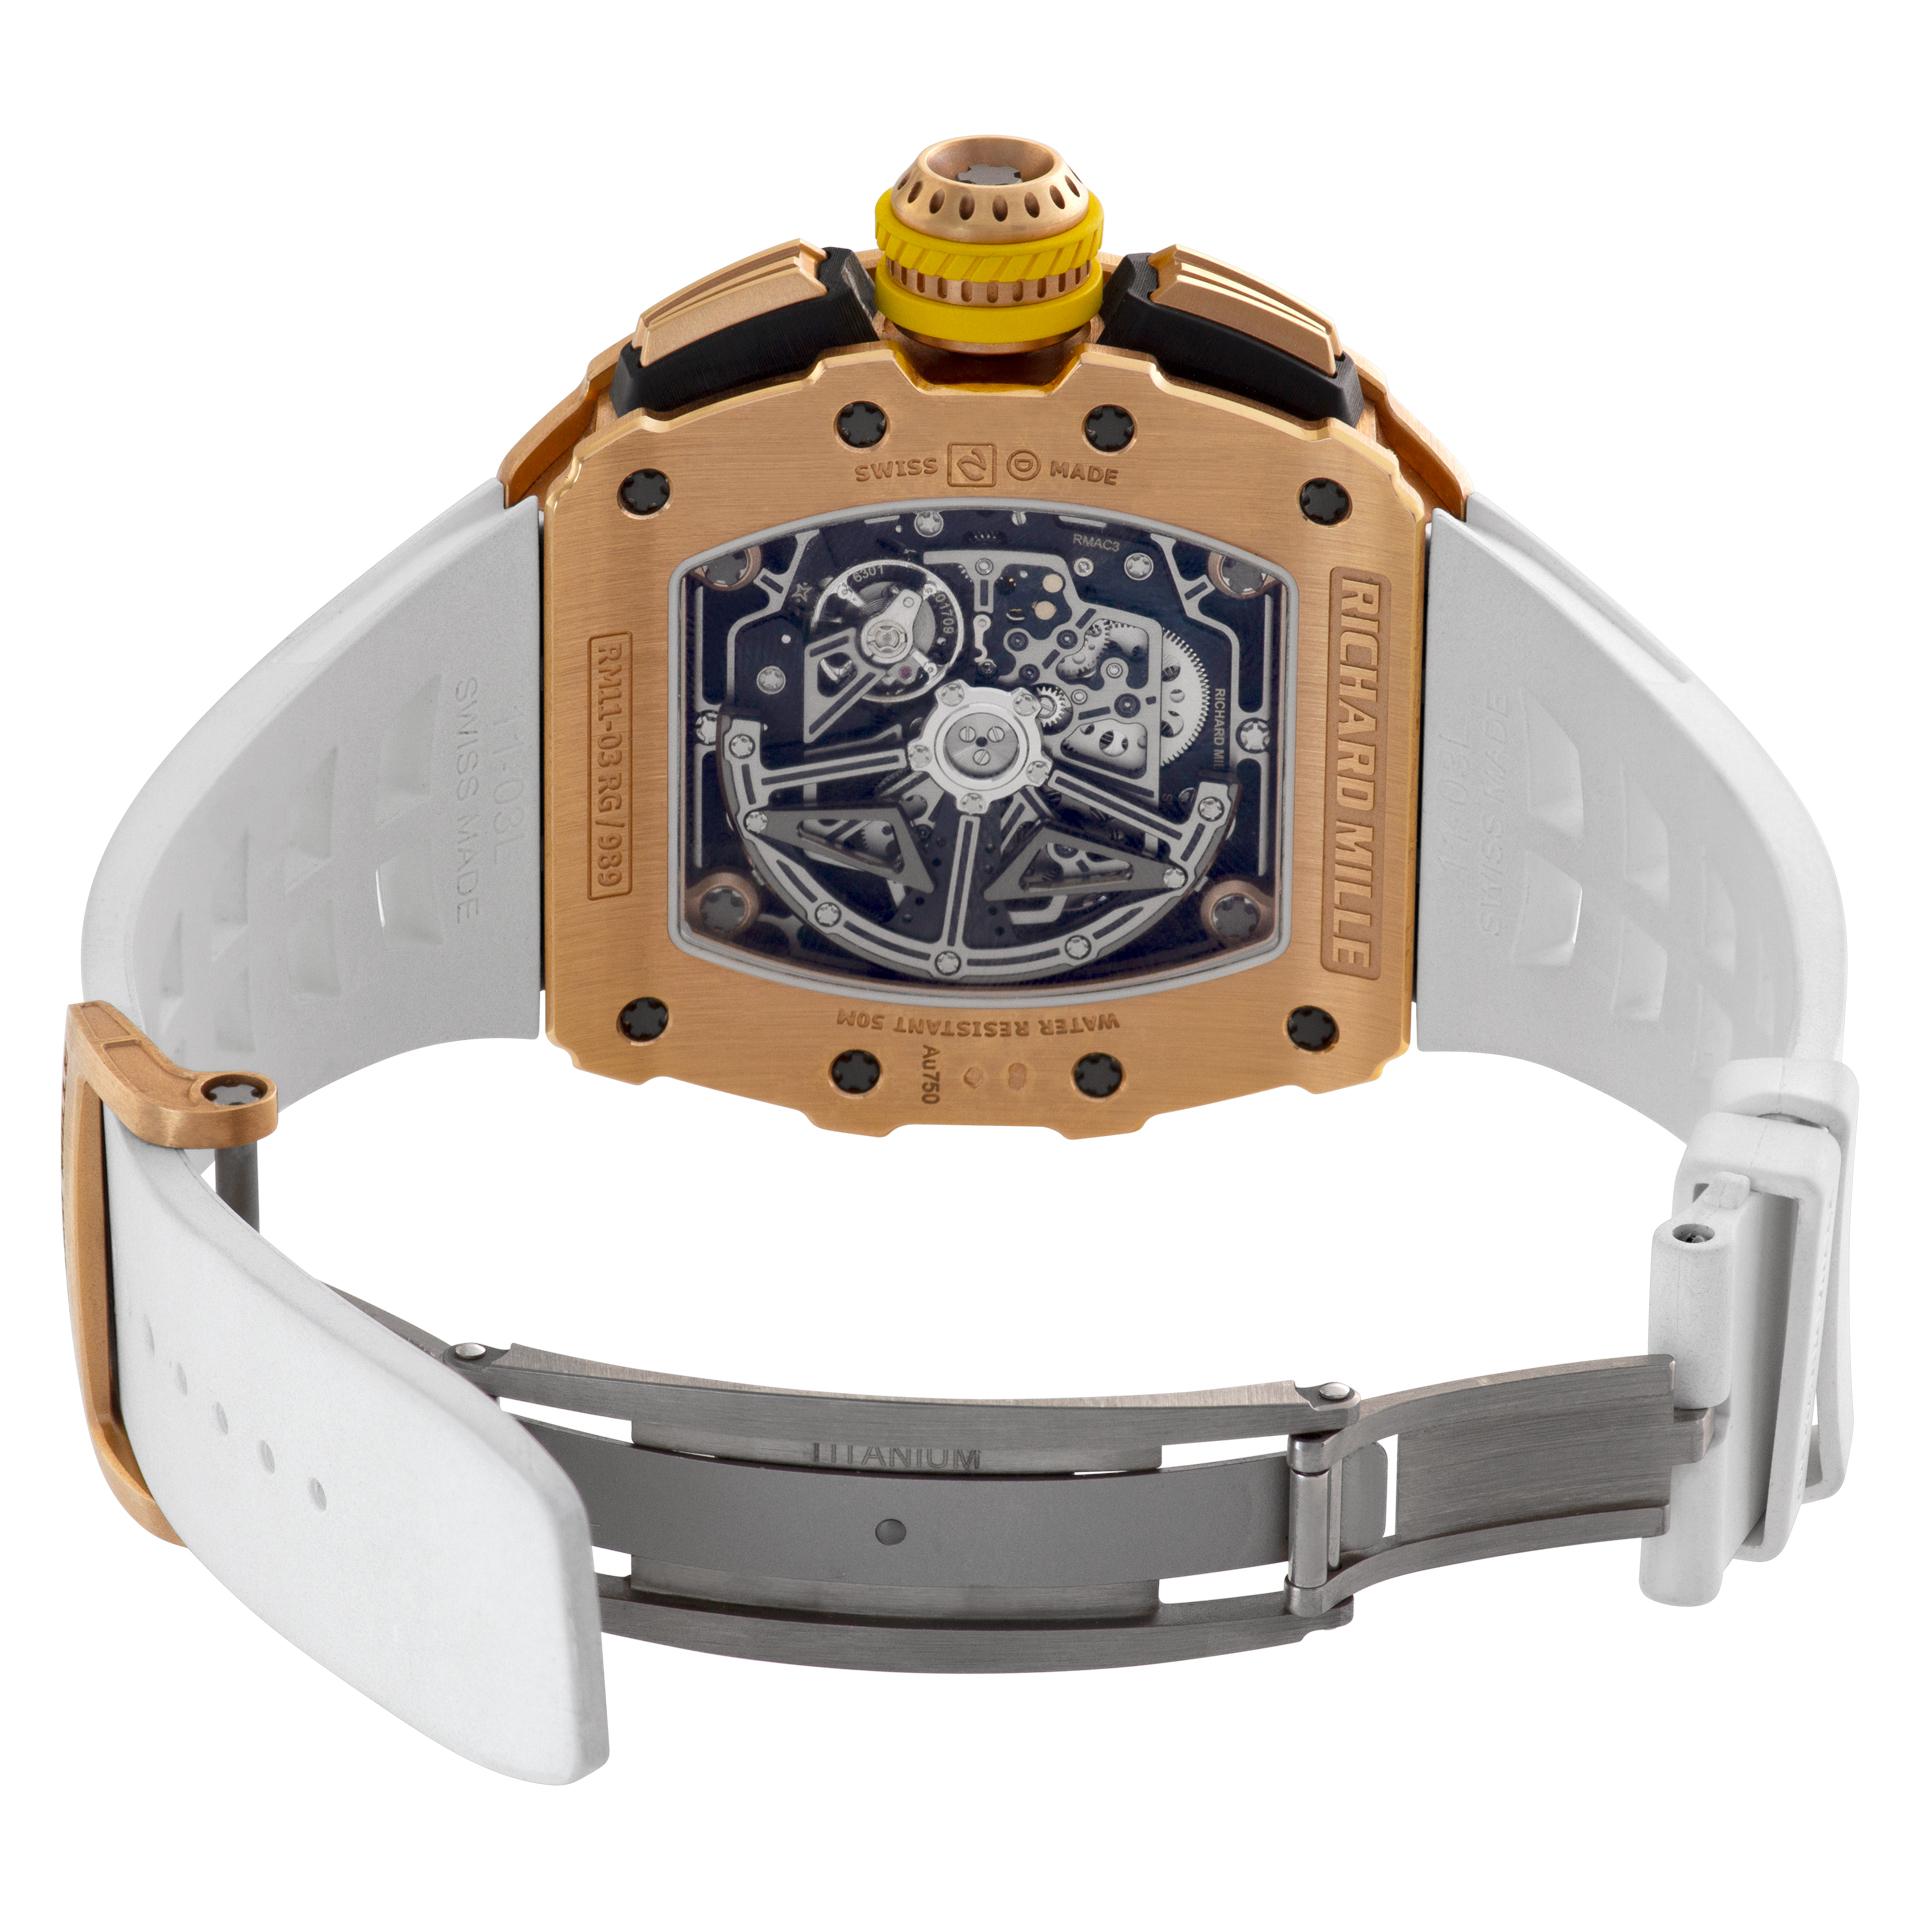 Richard Mille Flyback Chronograph 18k gold Automatic Wristwatch Ref RM11-03 RG For Sale 4